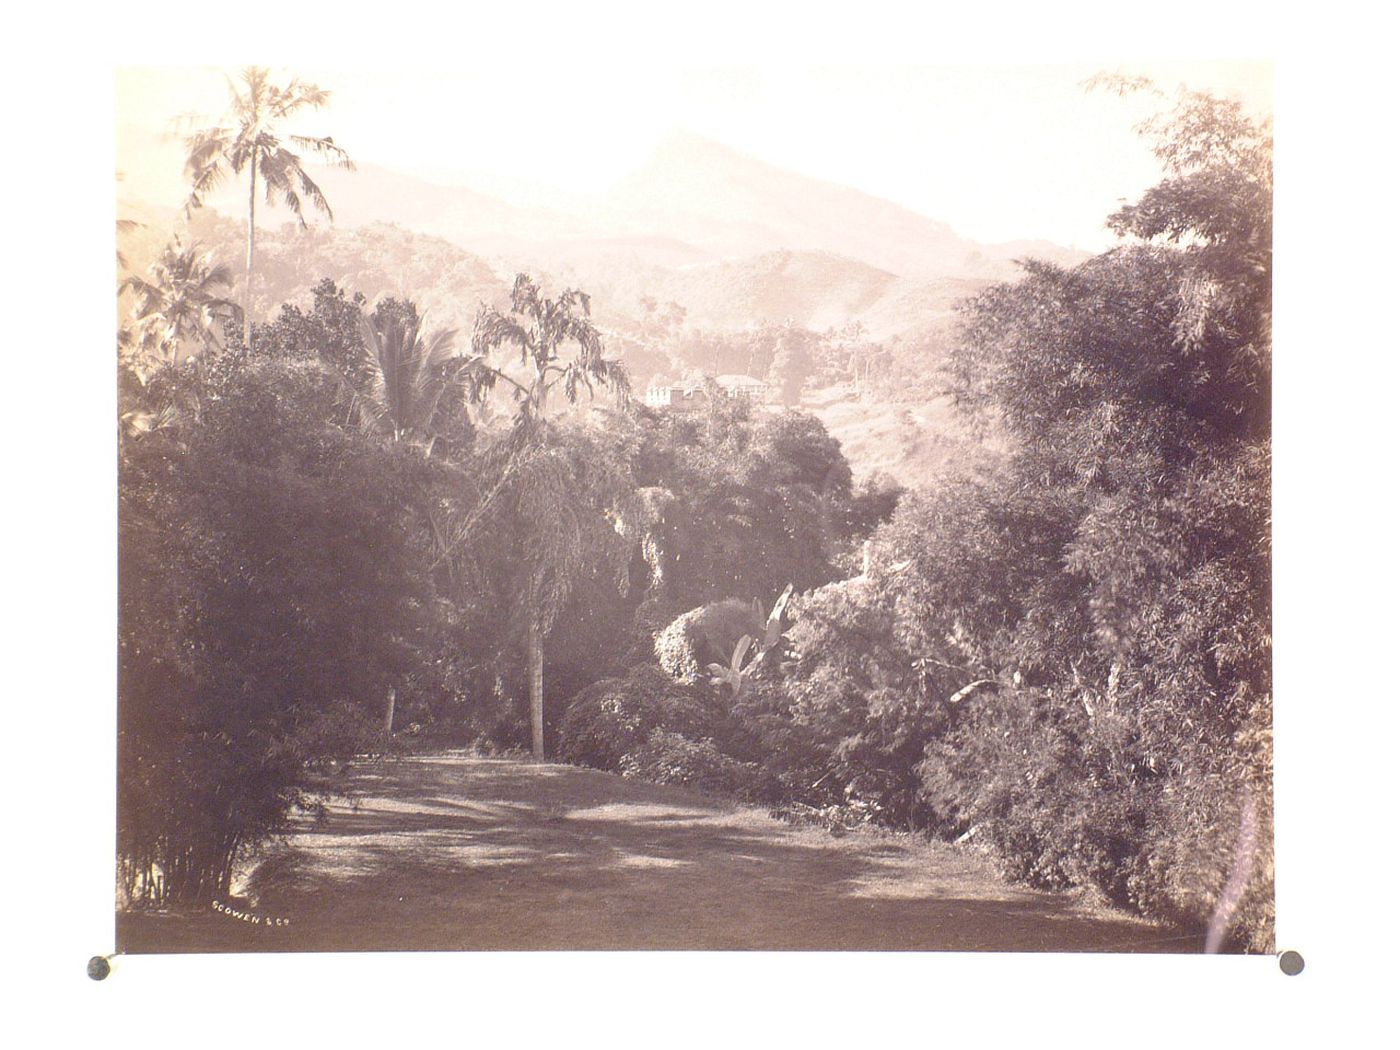 View of forests and mountains with the Hantana mountain range in the background and a clearing in the foreground, near Kandy, Ceylon (now Sri Lanka)